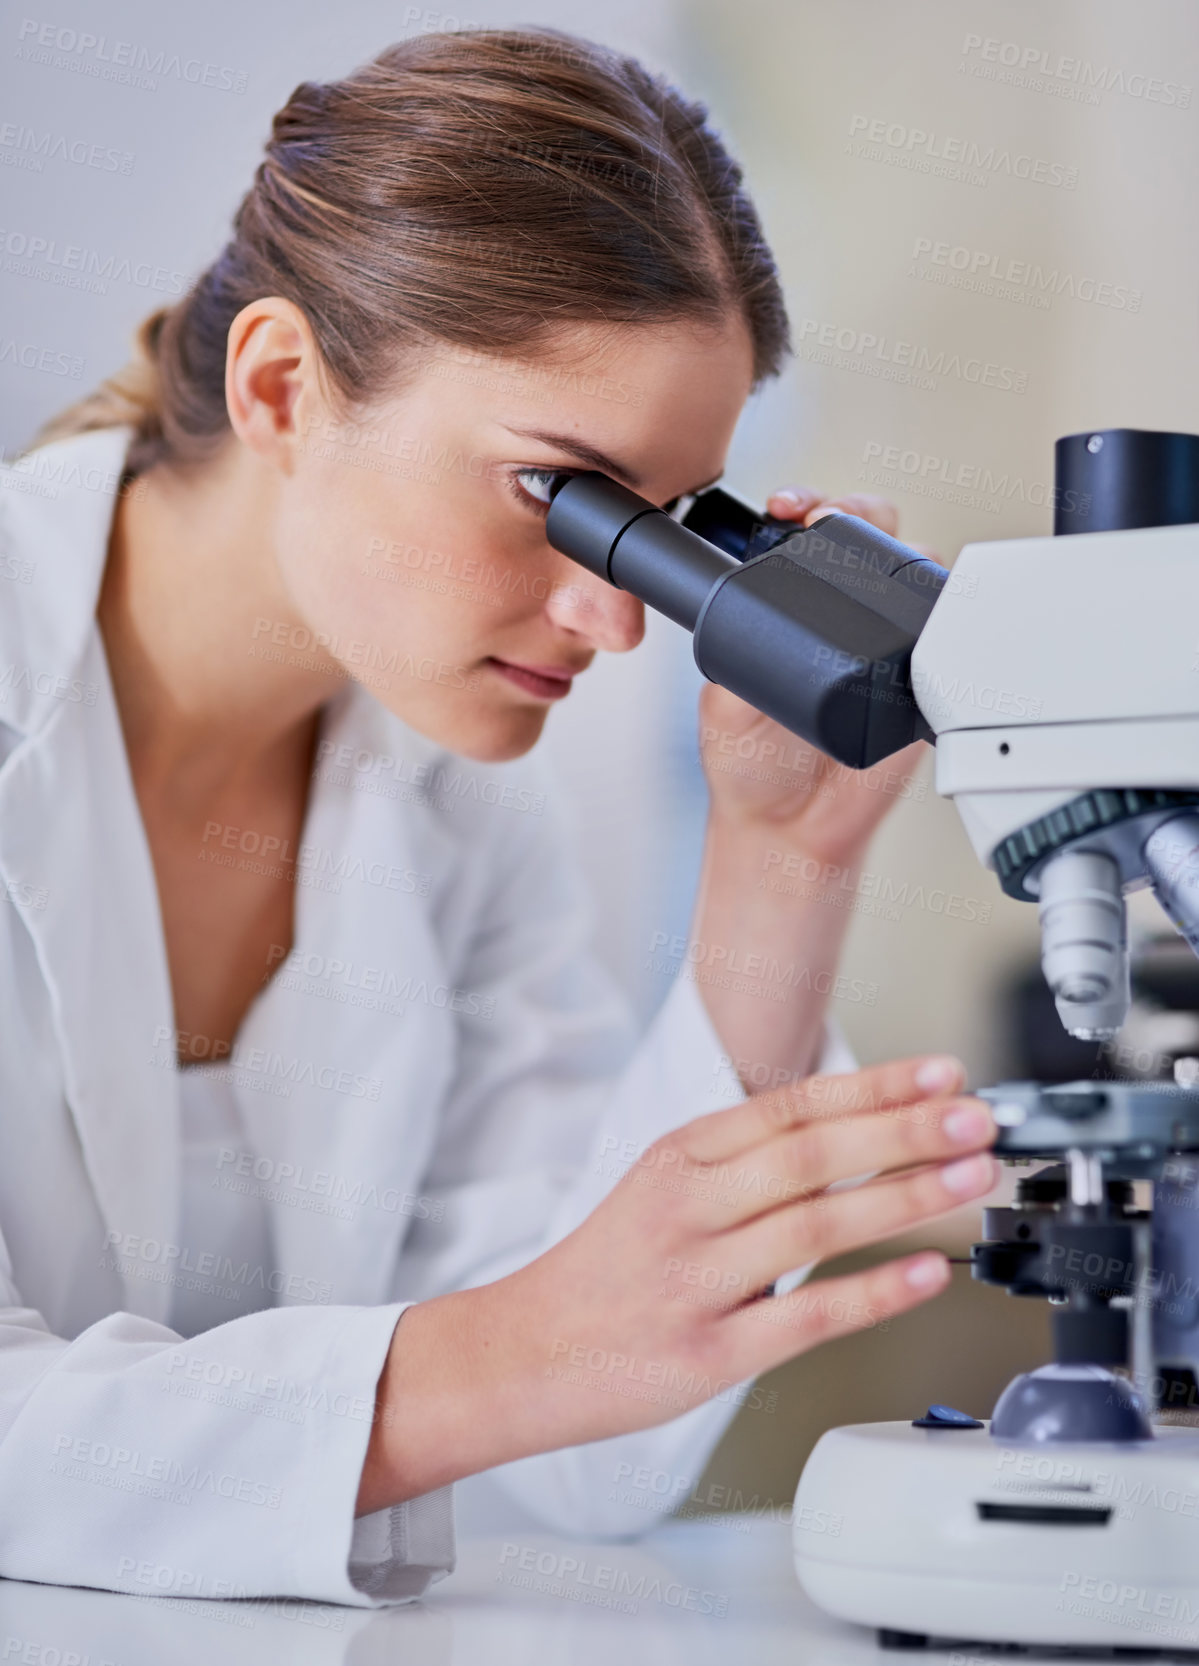 Buy stock photo Shot of a scientist using a microscope while sitting in a laboratory